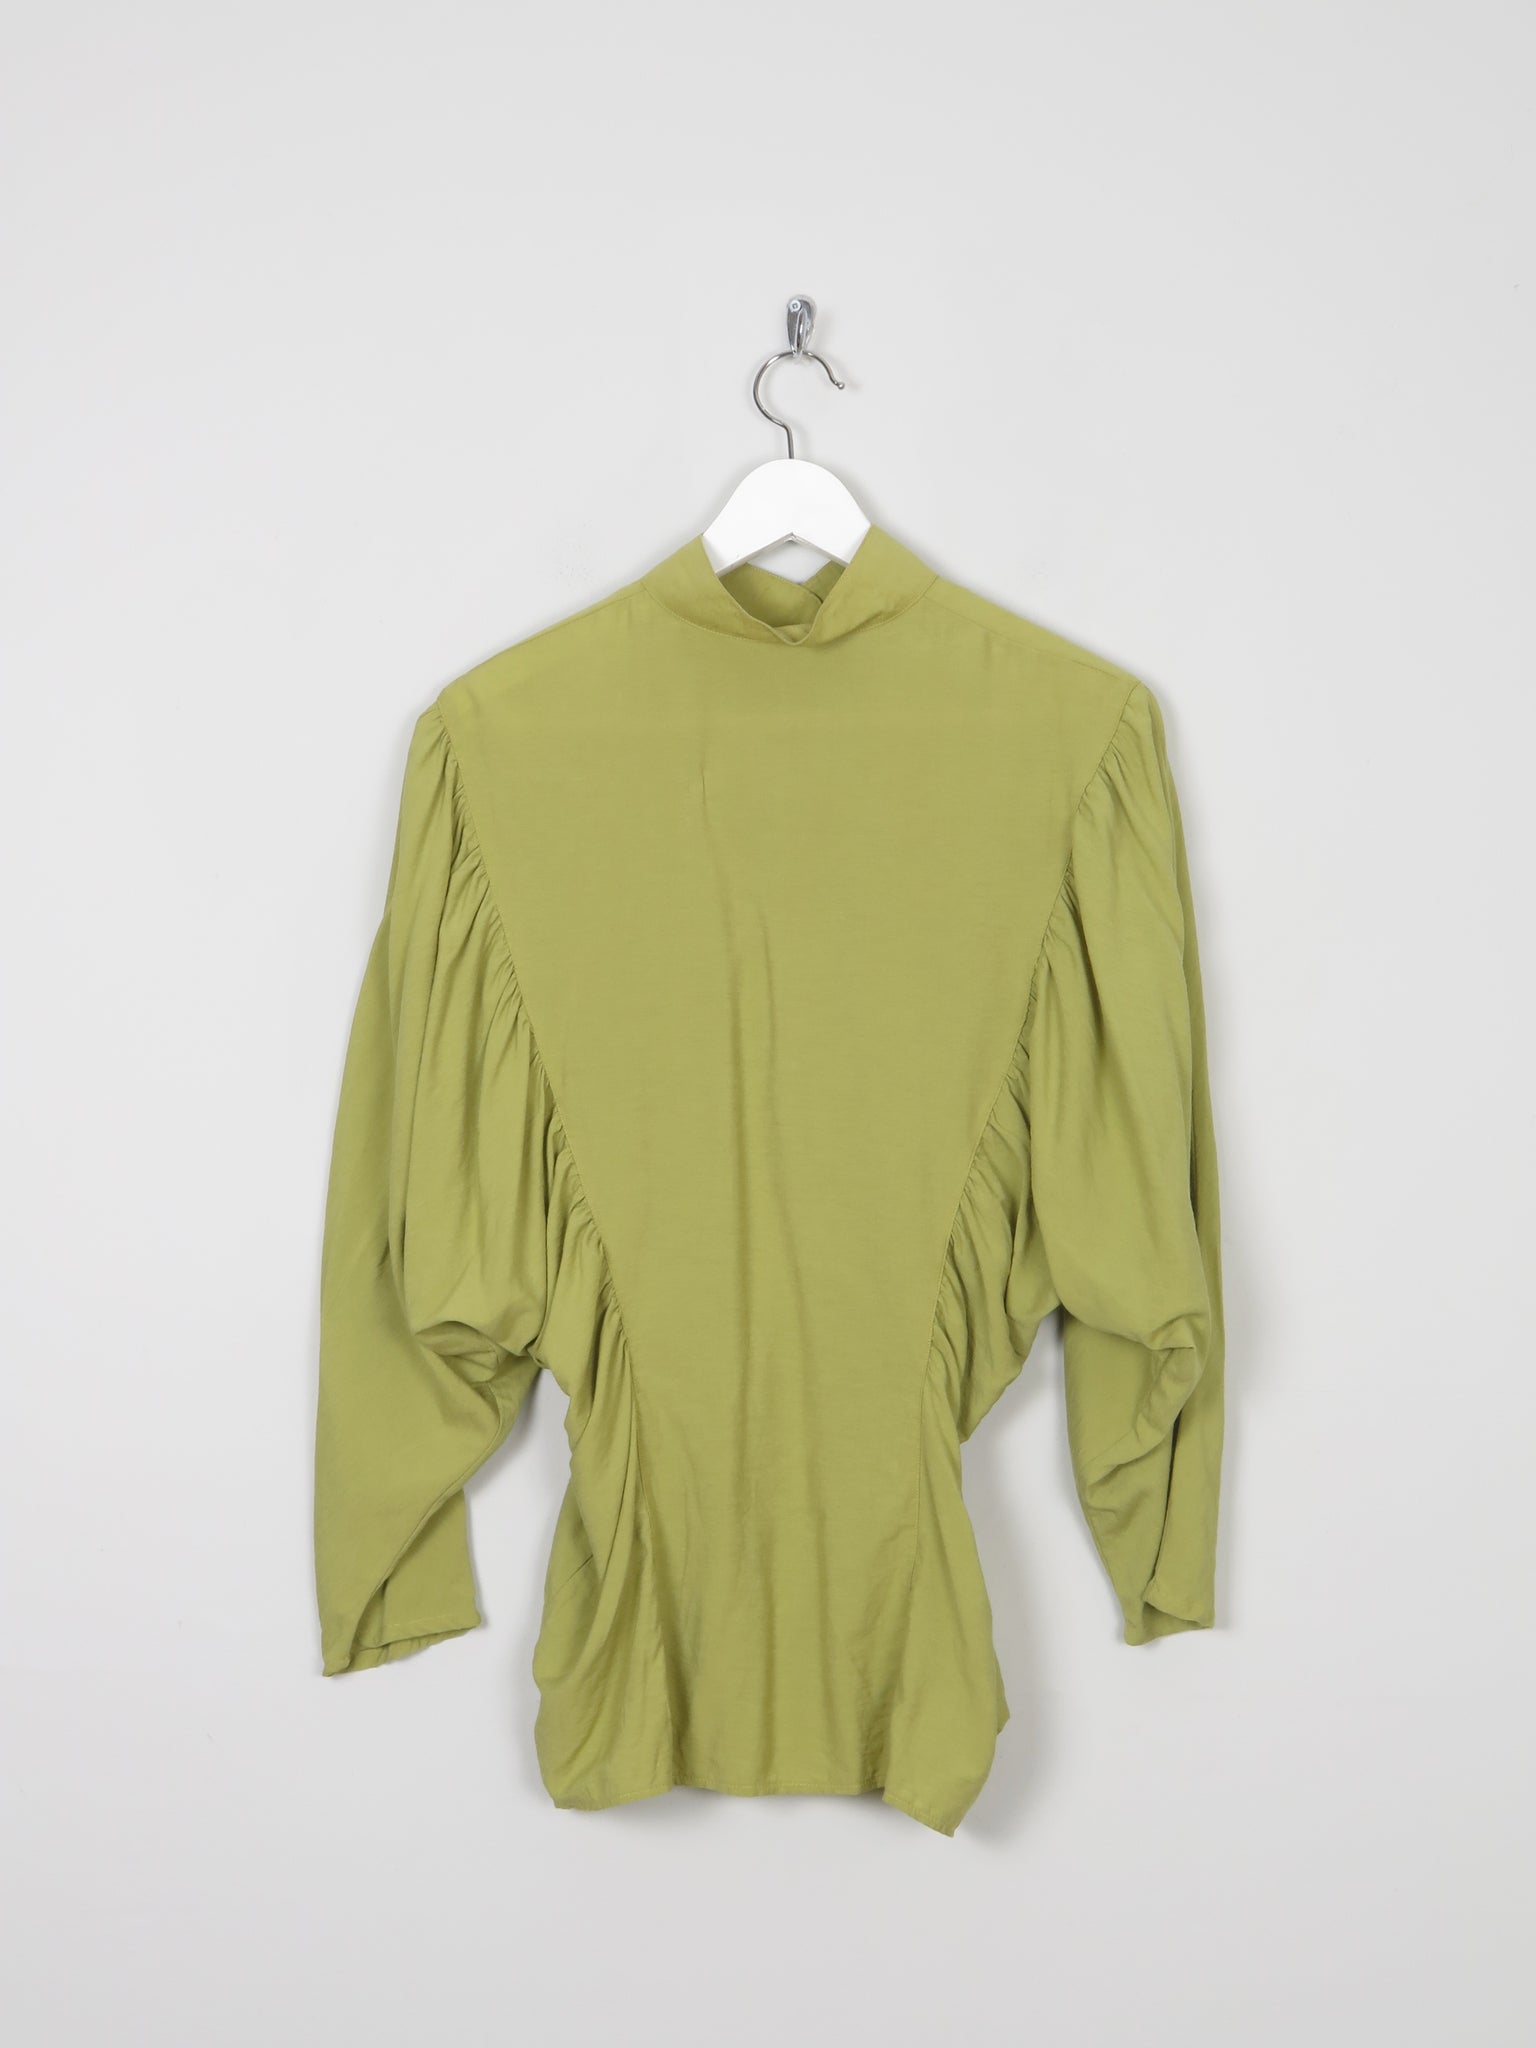 Lime Green Vintage Blouse With Bat Wing Sleeves Relaxed Fit S - The Harlequin